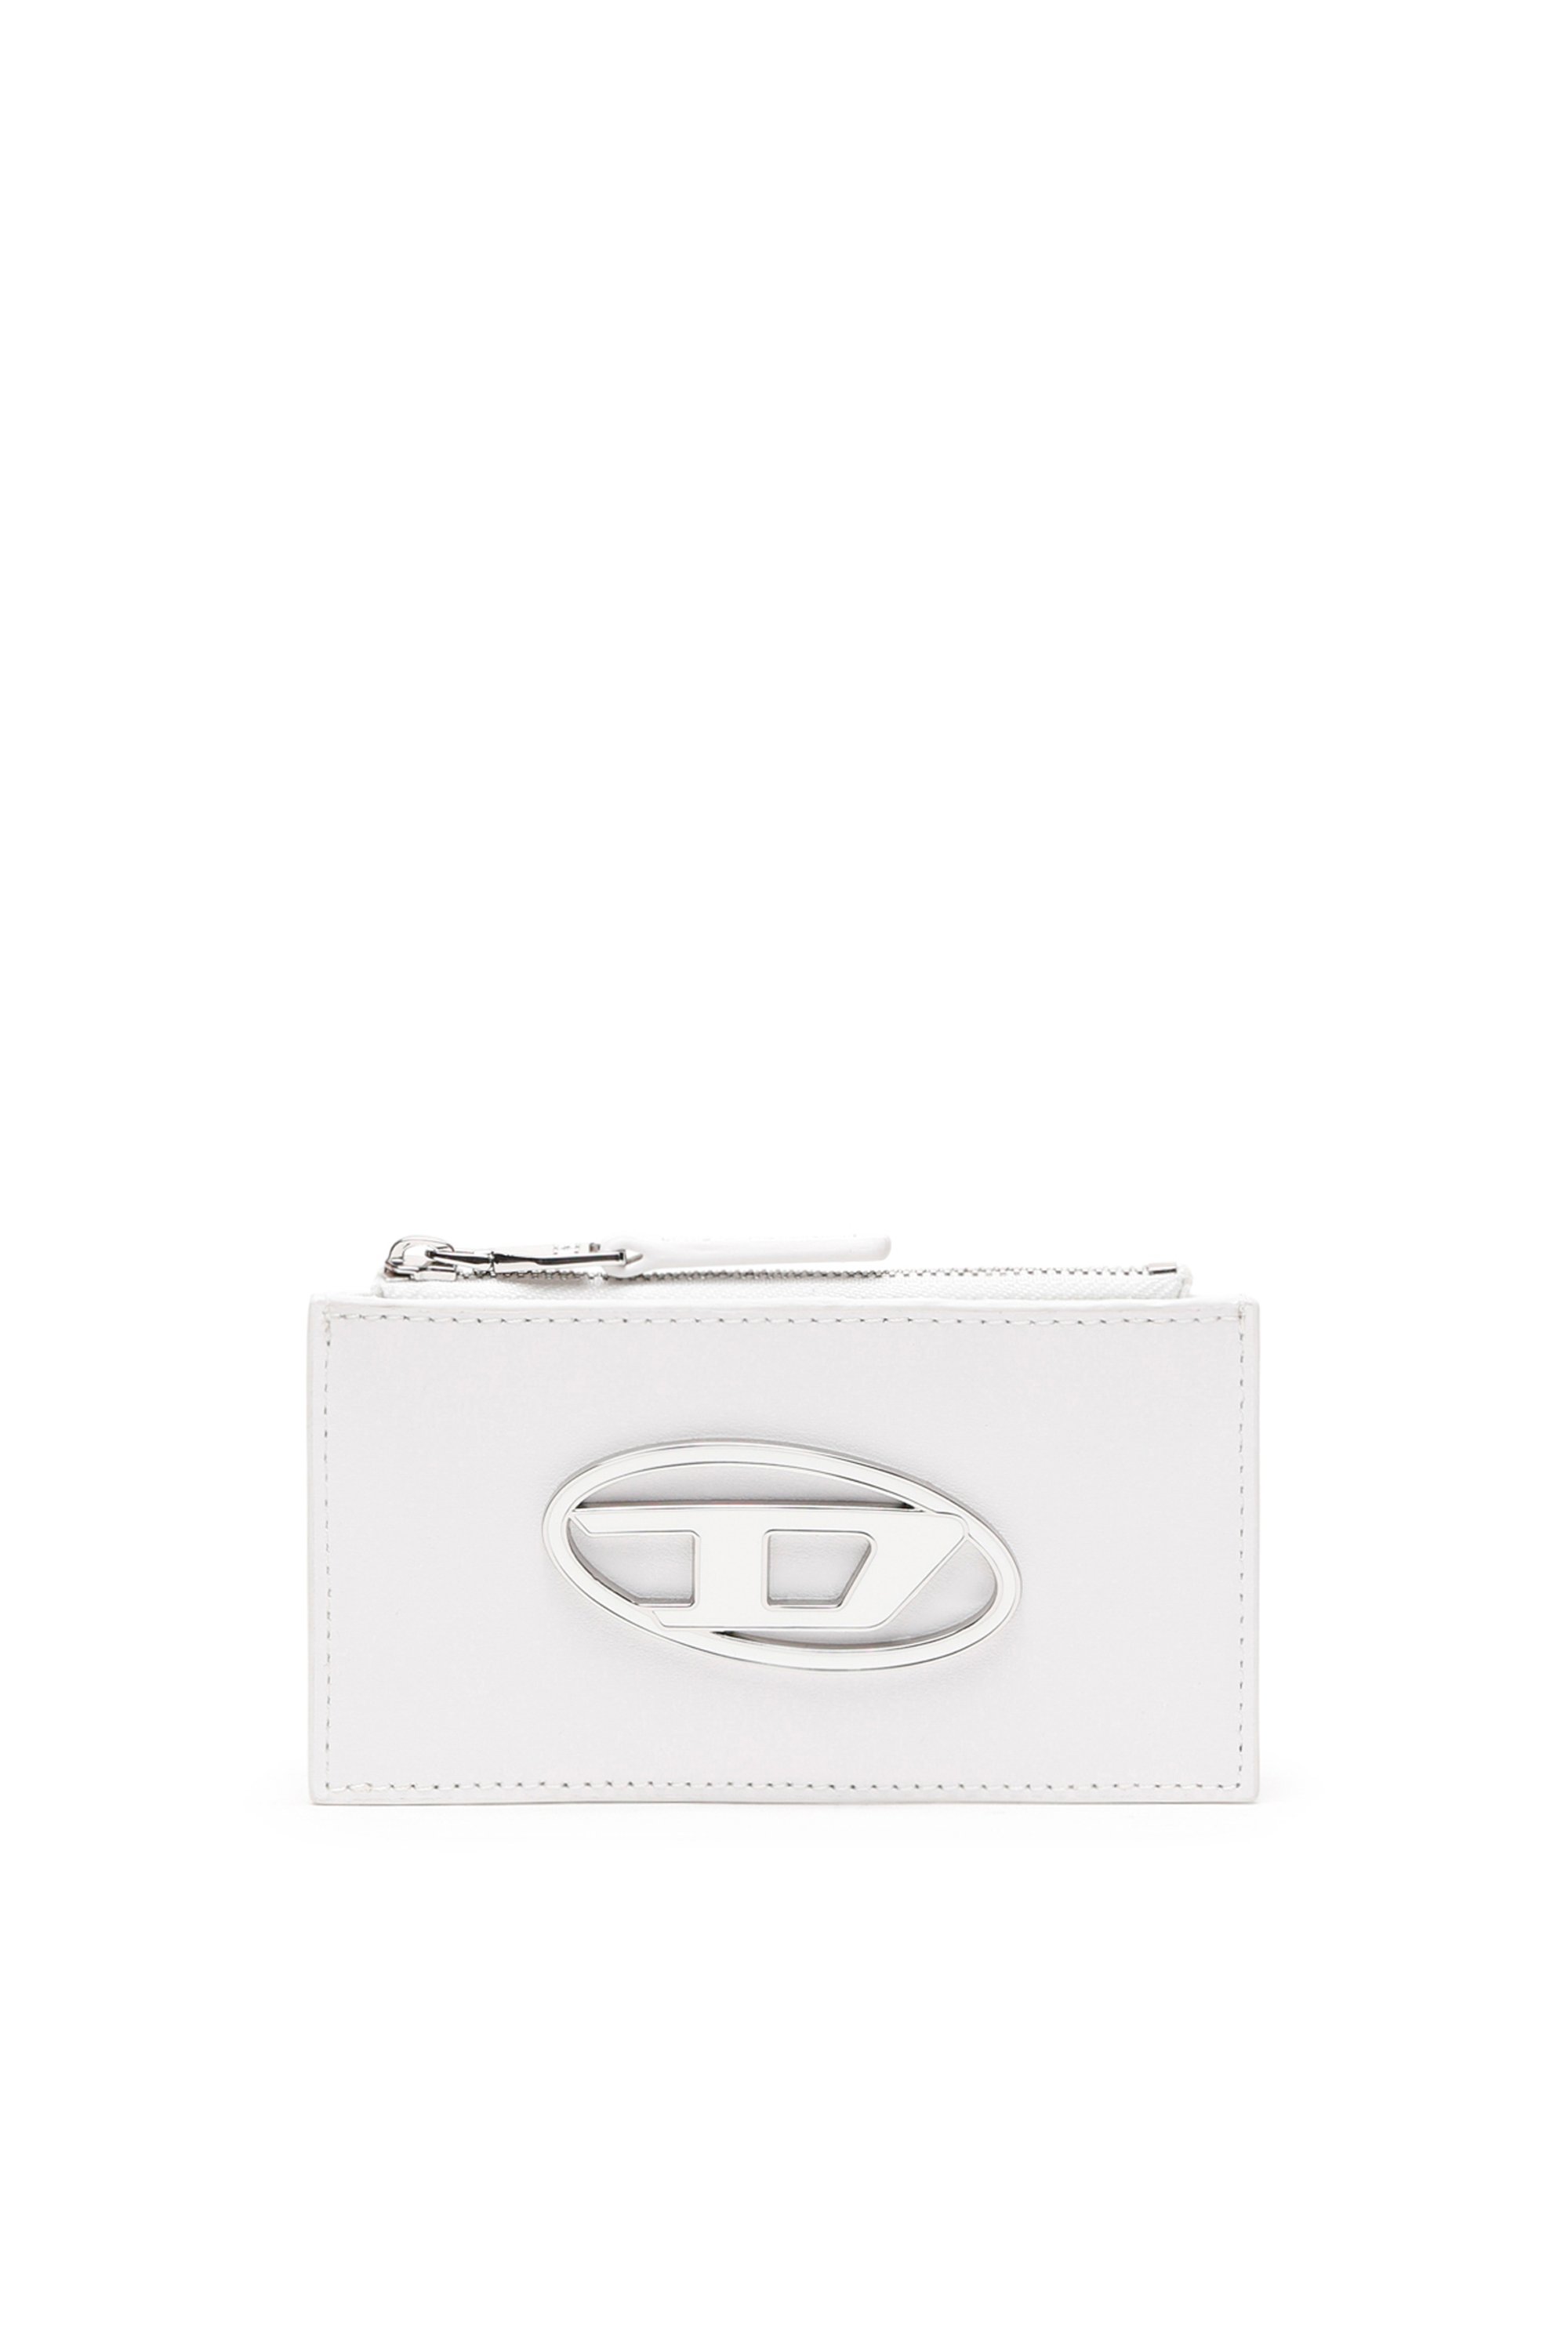 Diesel - PAOULINA, Blanco - Image 1